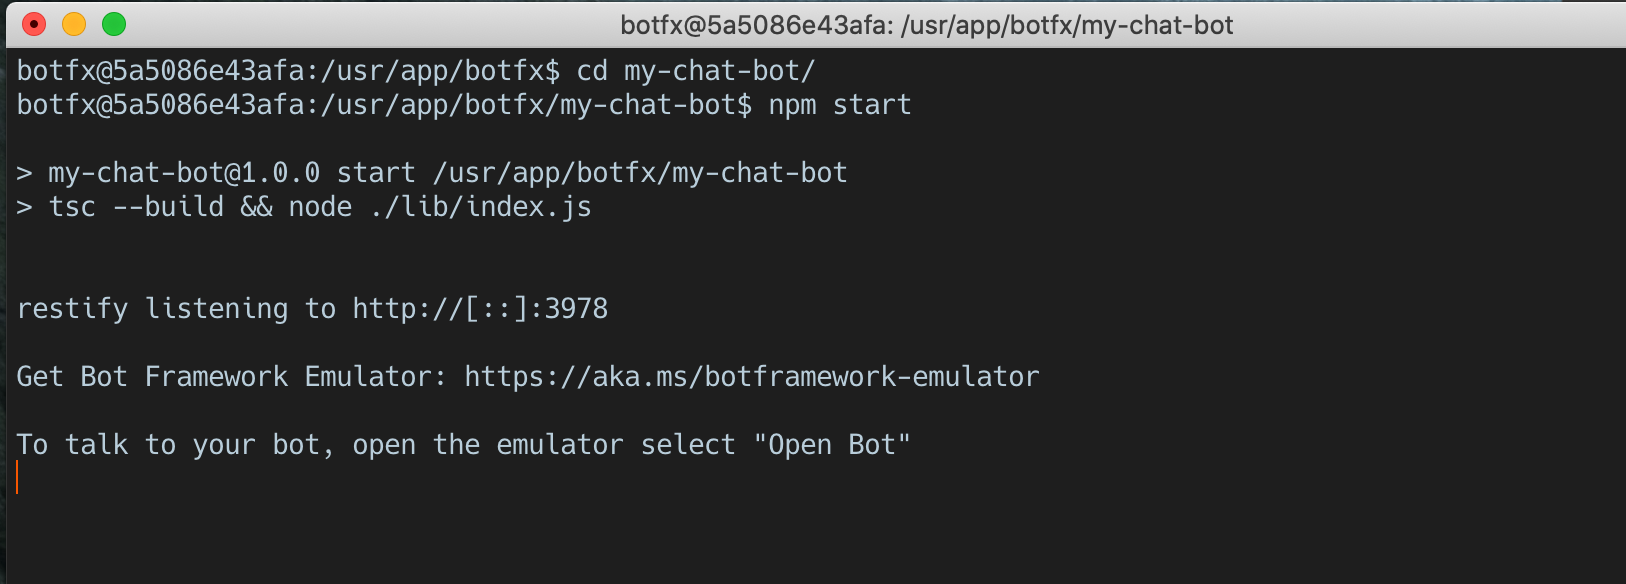 Chat running in Docker container